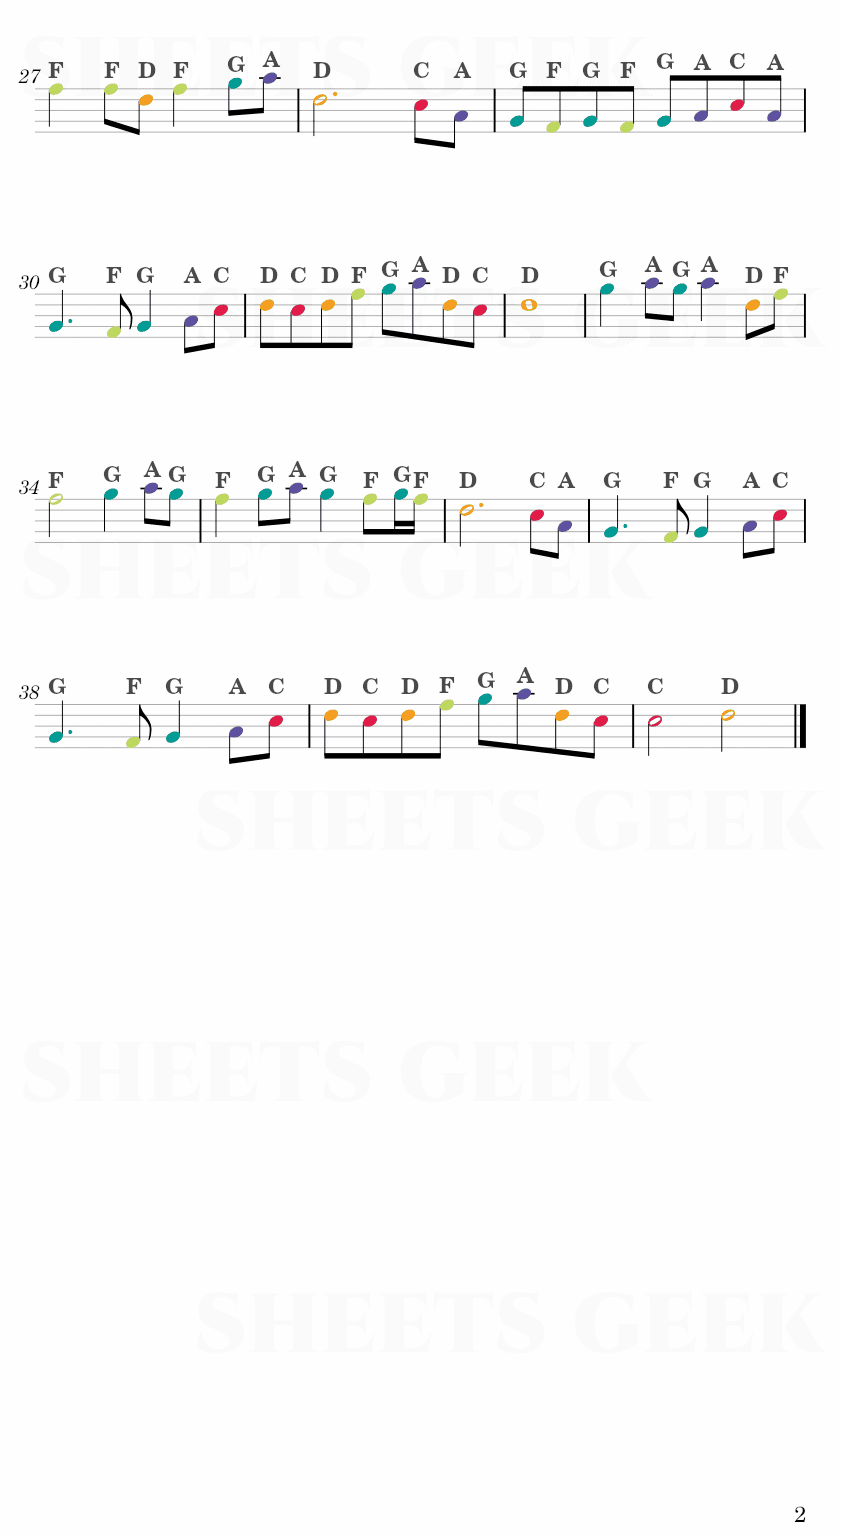 Trail of the Angels - Chen Yue Easy Sheets Music Free for piano, keyboard, flute, violin, sax, celllo 2